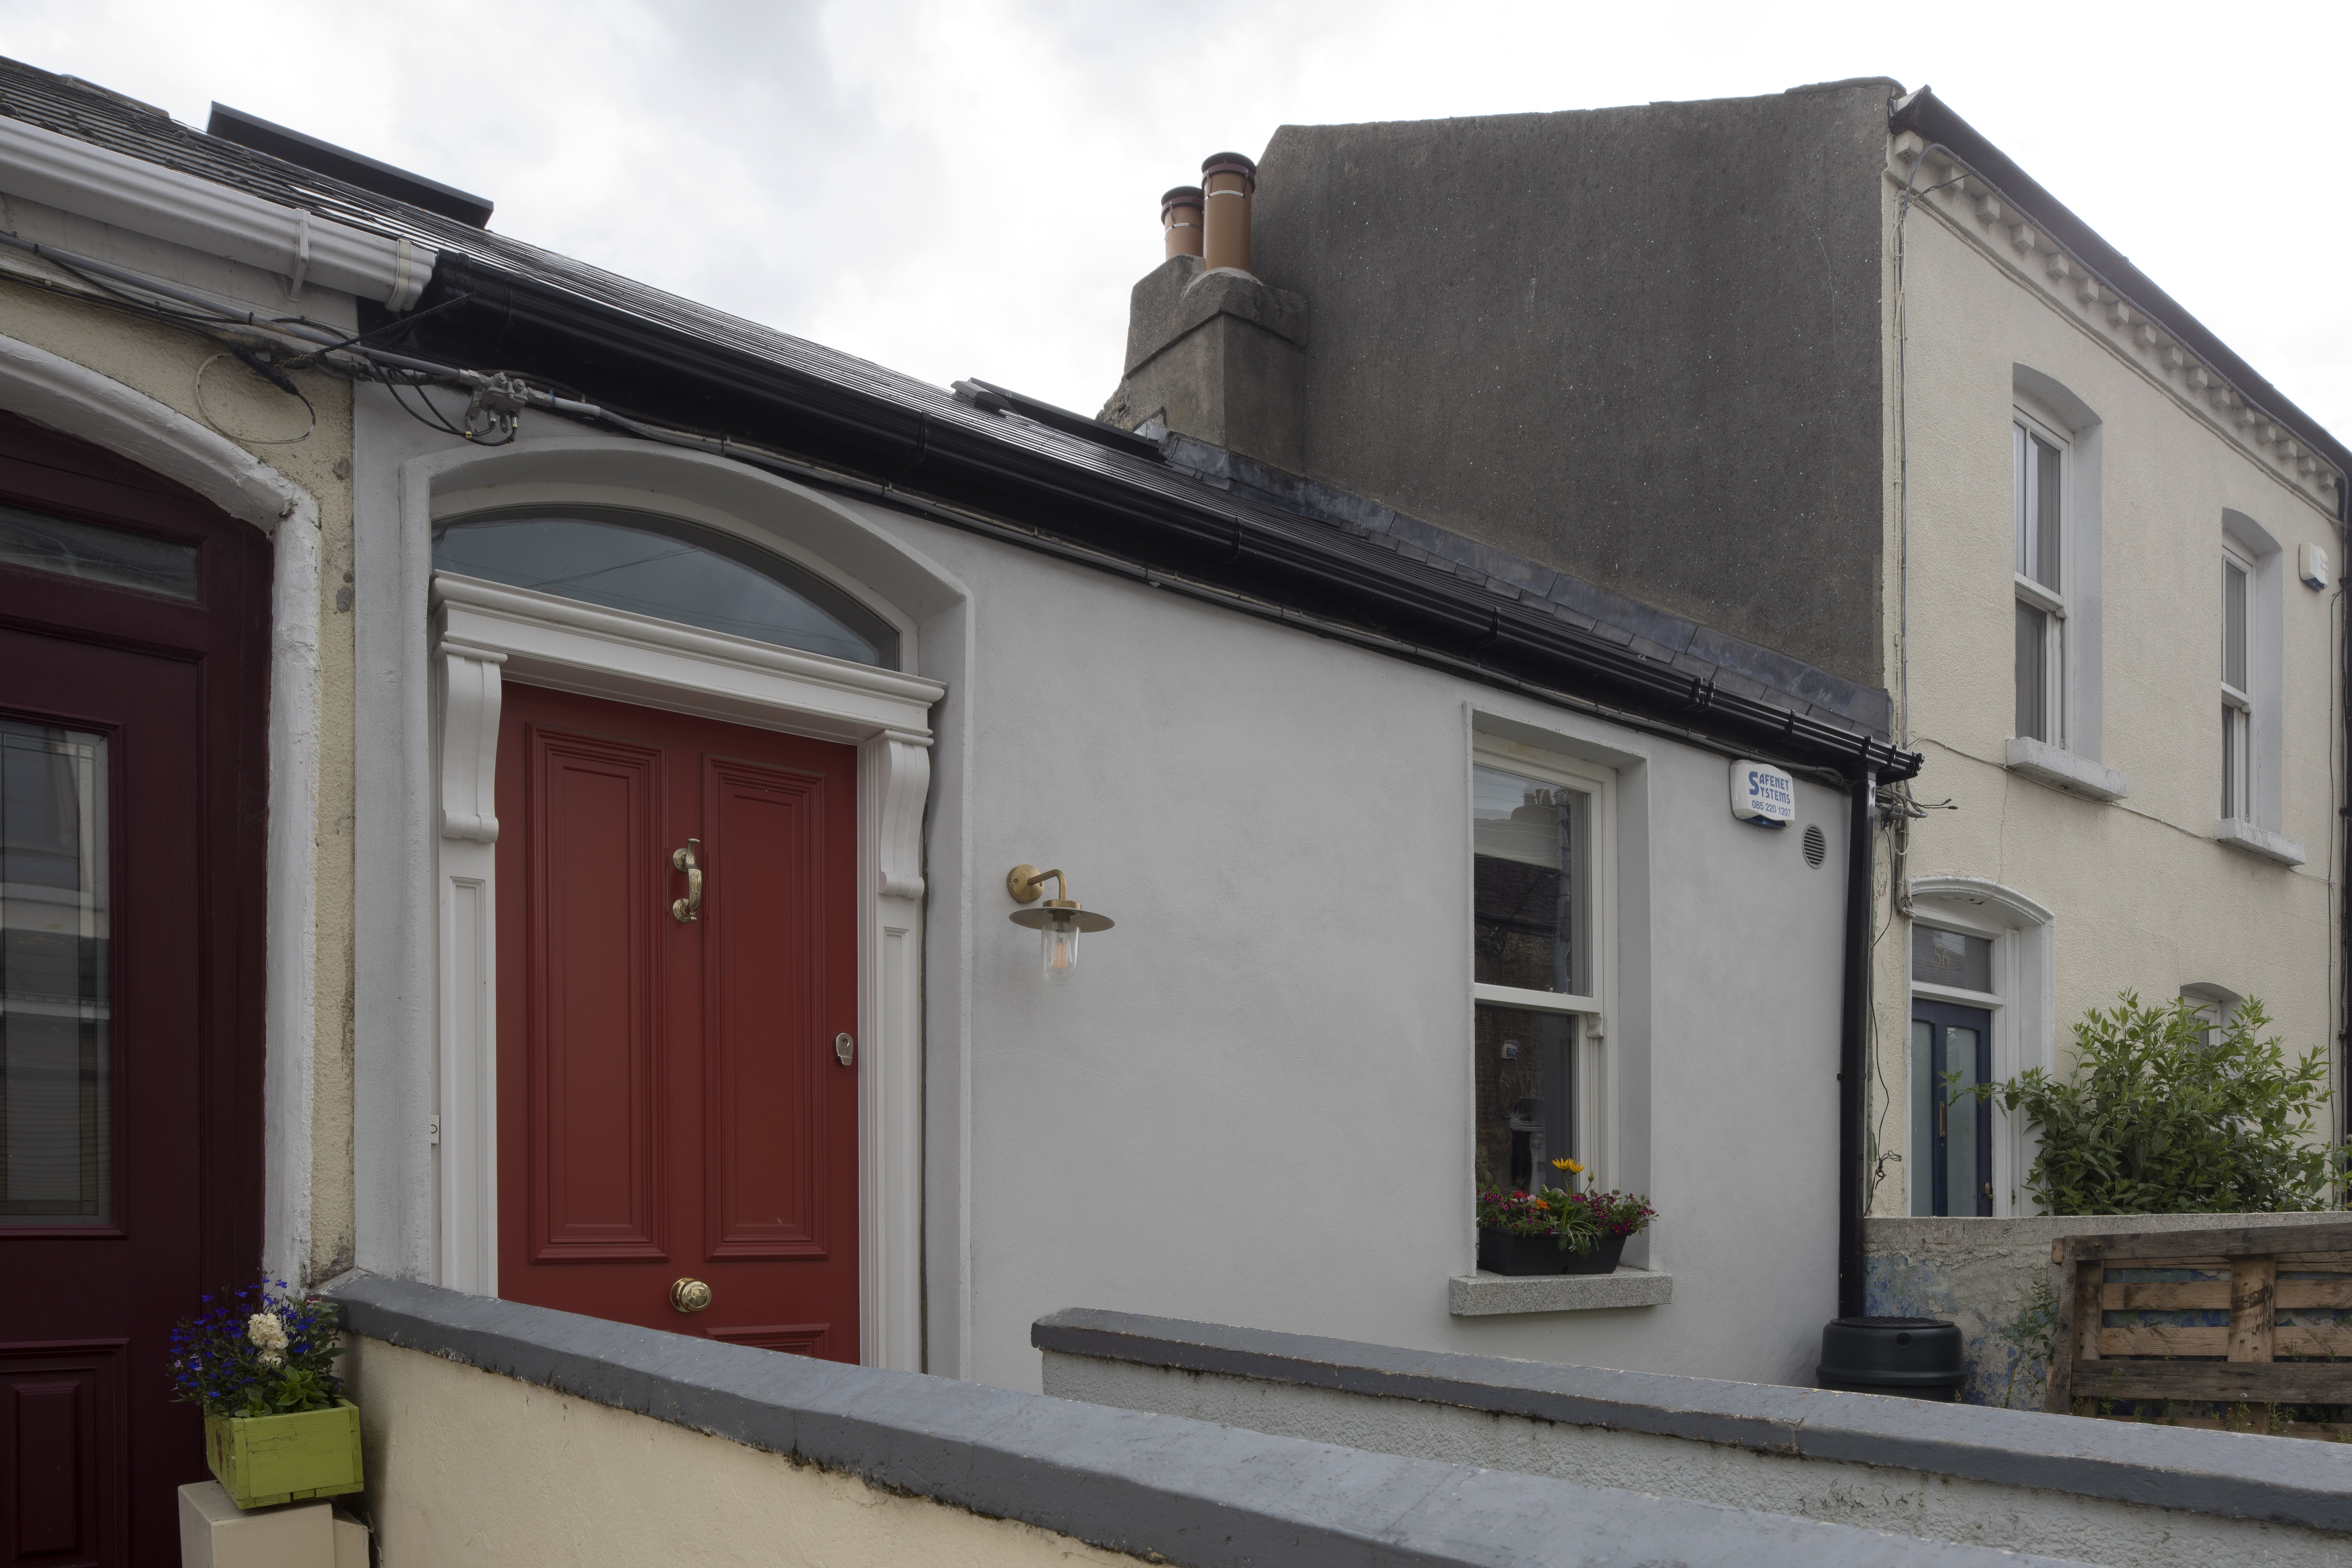 Dublin cottage with 'disco toilet' wins Home of the Year